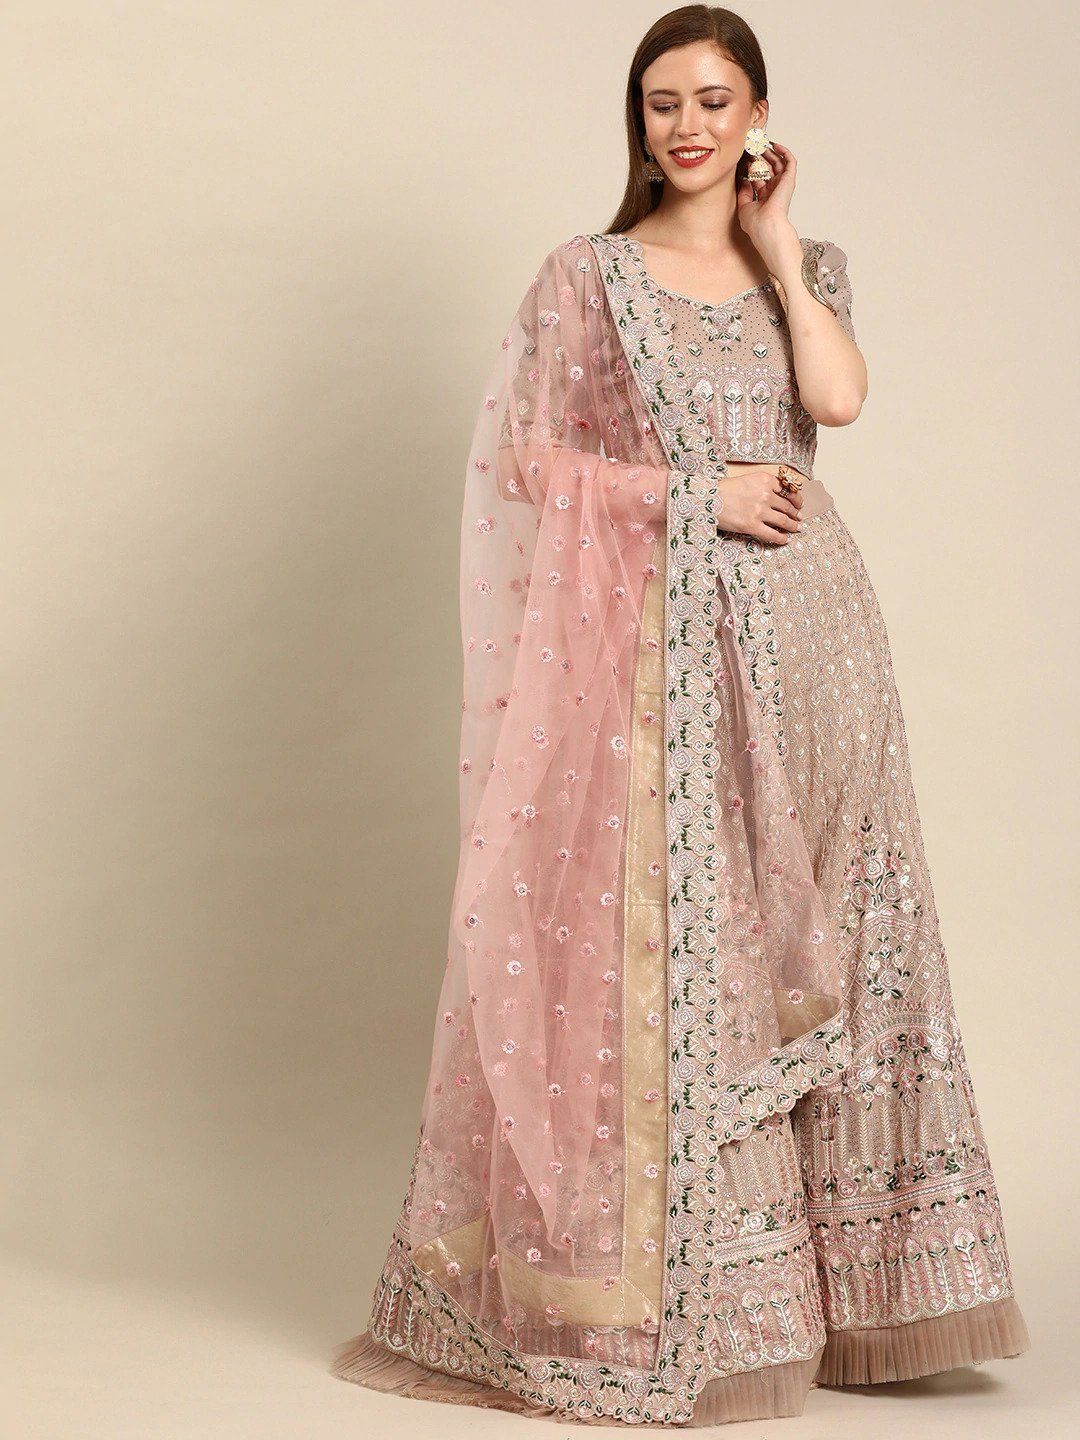 Beige & Pink Embroidered Semi-Stitched Myntra Lehenga & Blouse with Dupatta